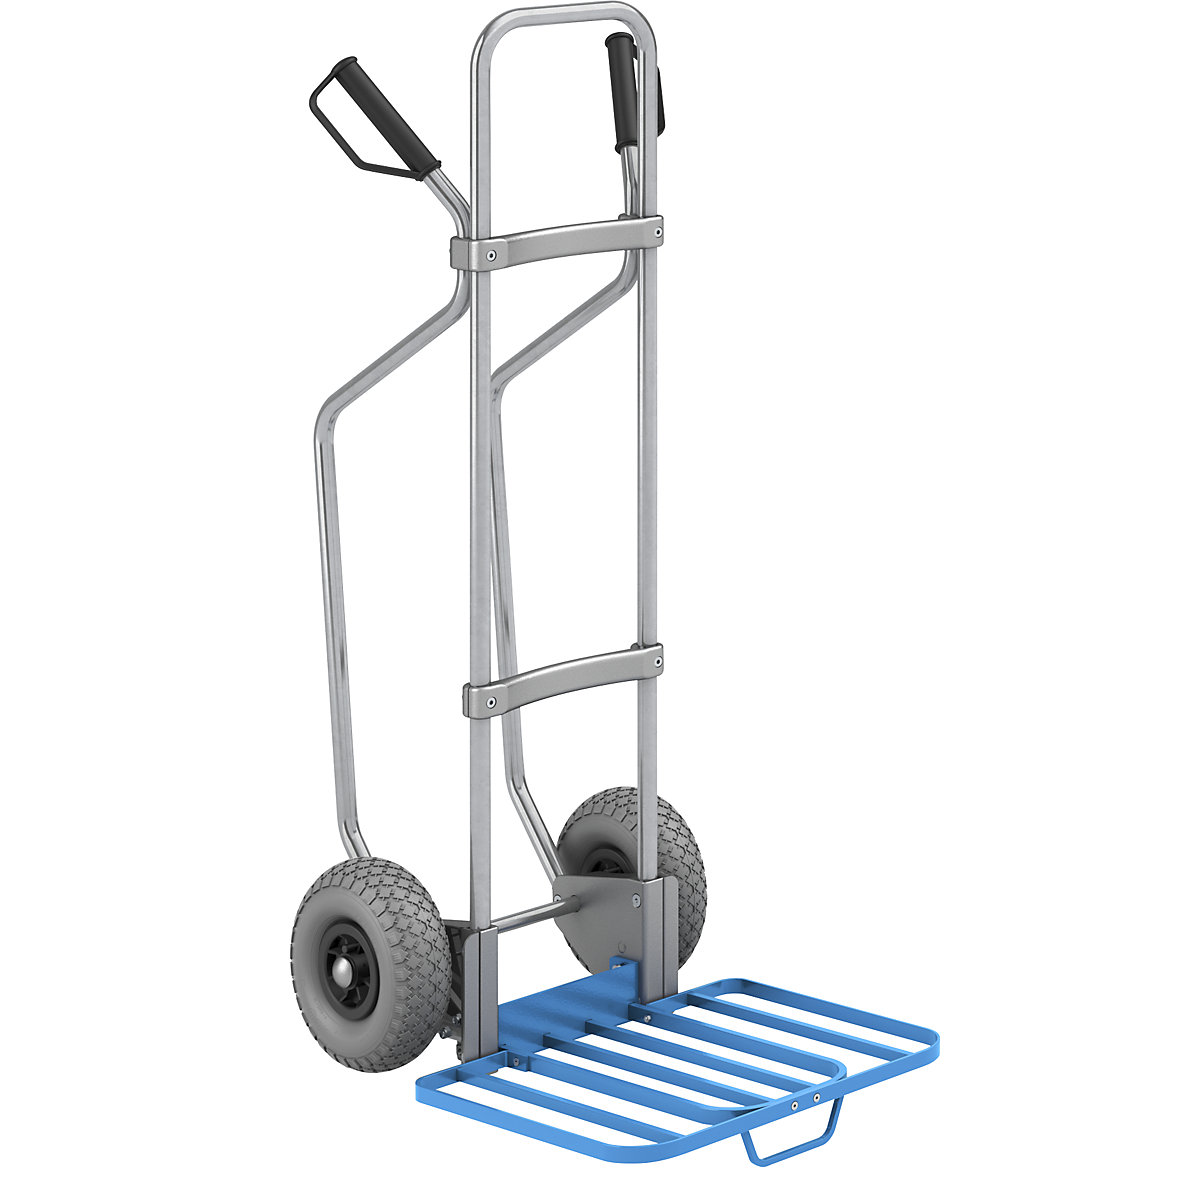 Sack truck with runners, zinc plated – eurokraft pro, parcel footplate WxD 430 x 450 mm, blue, with handle, PU tyres-1